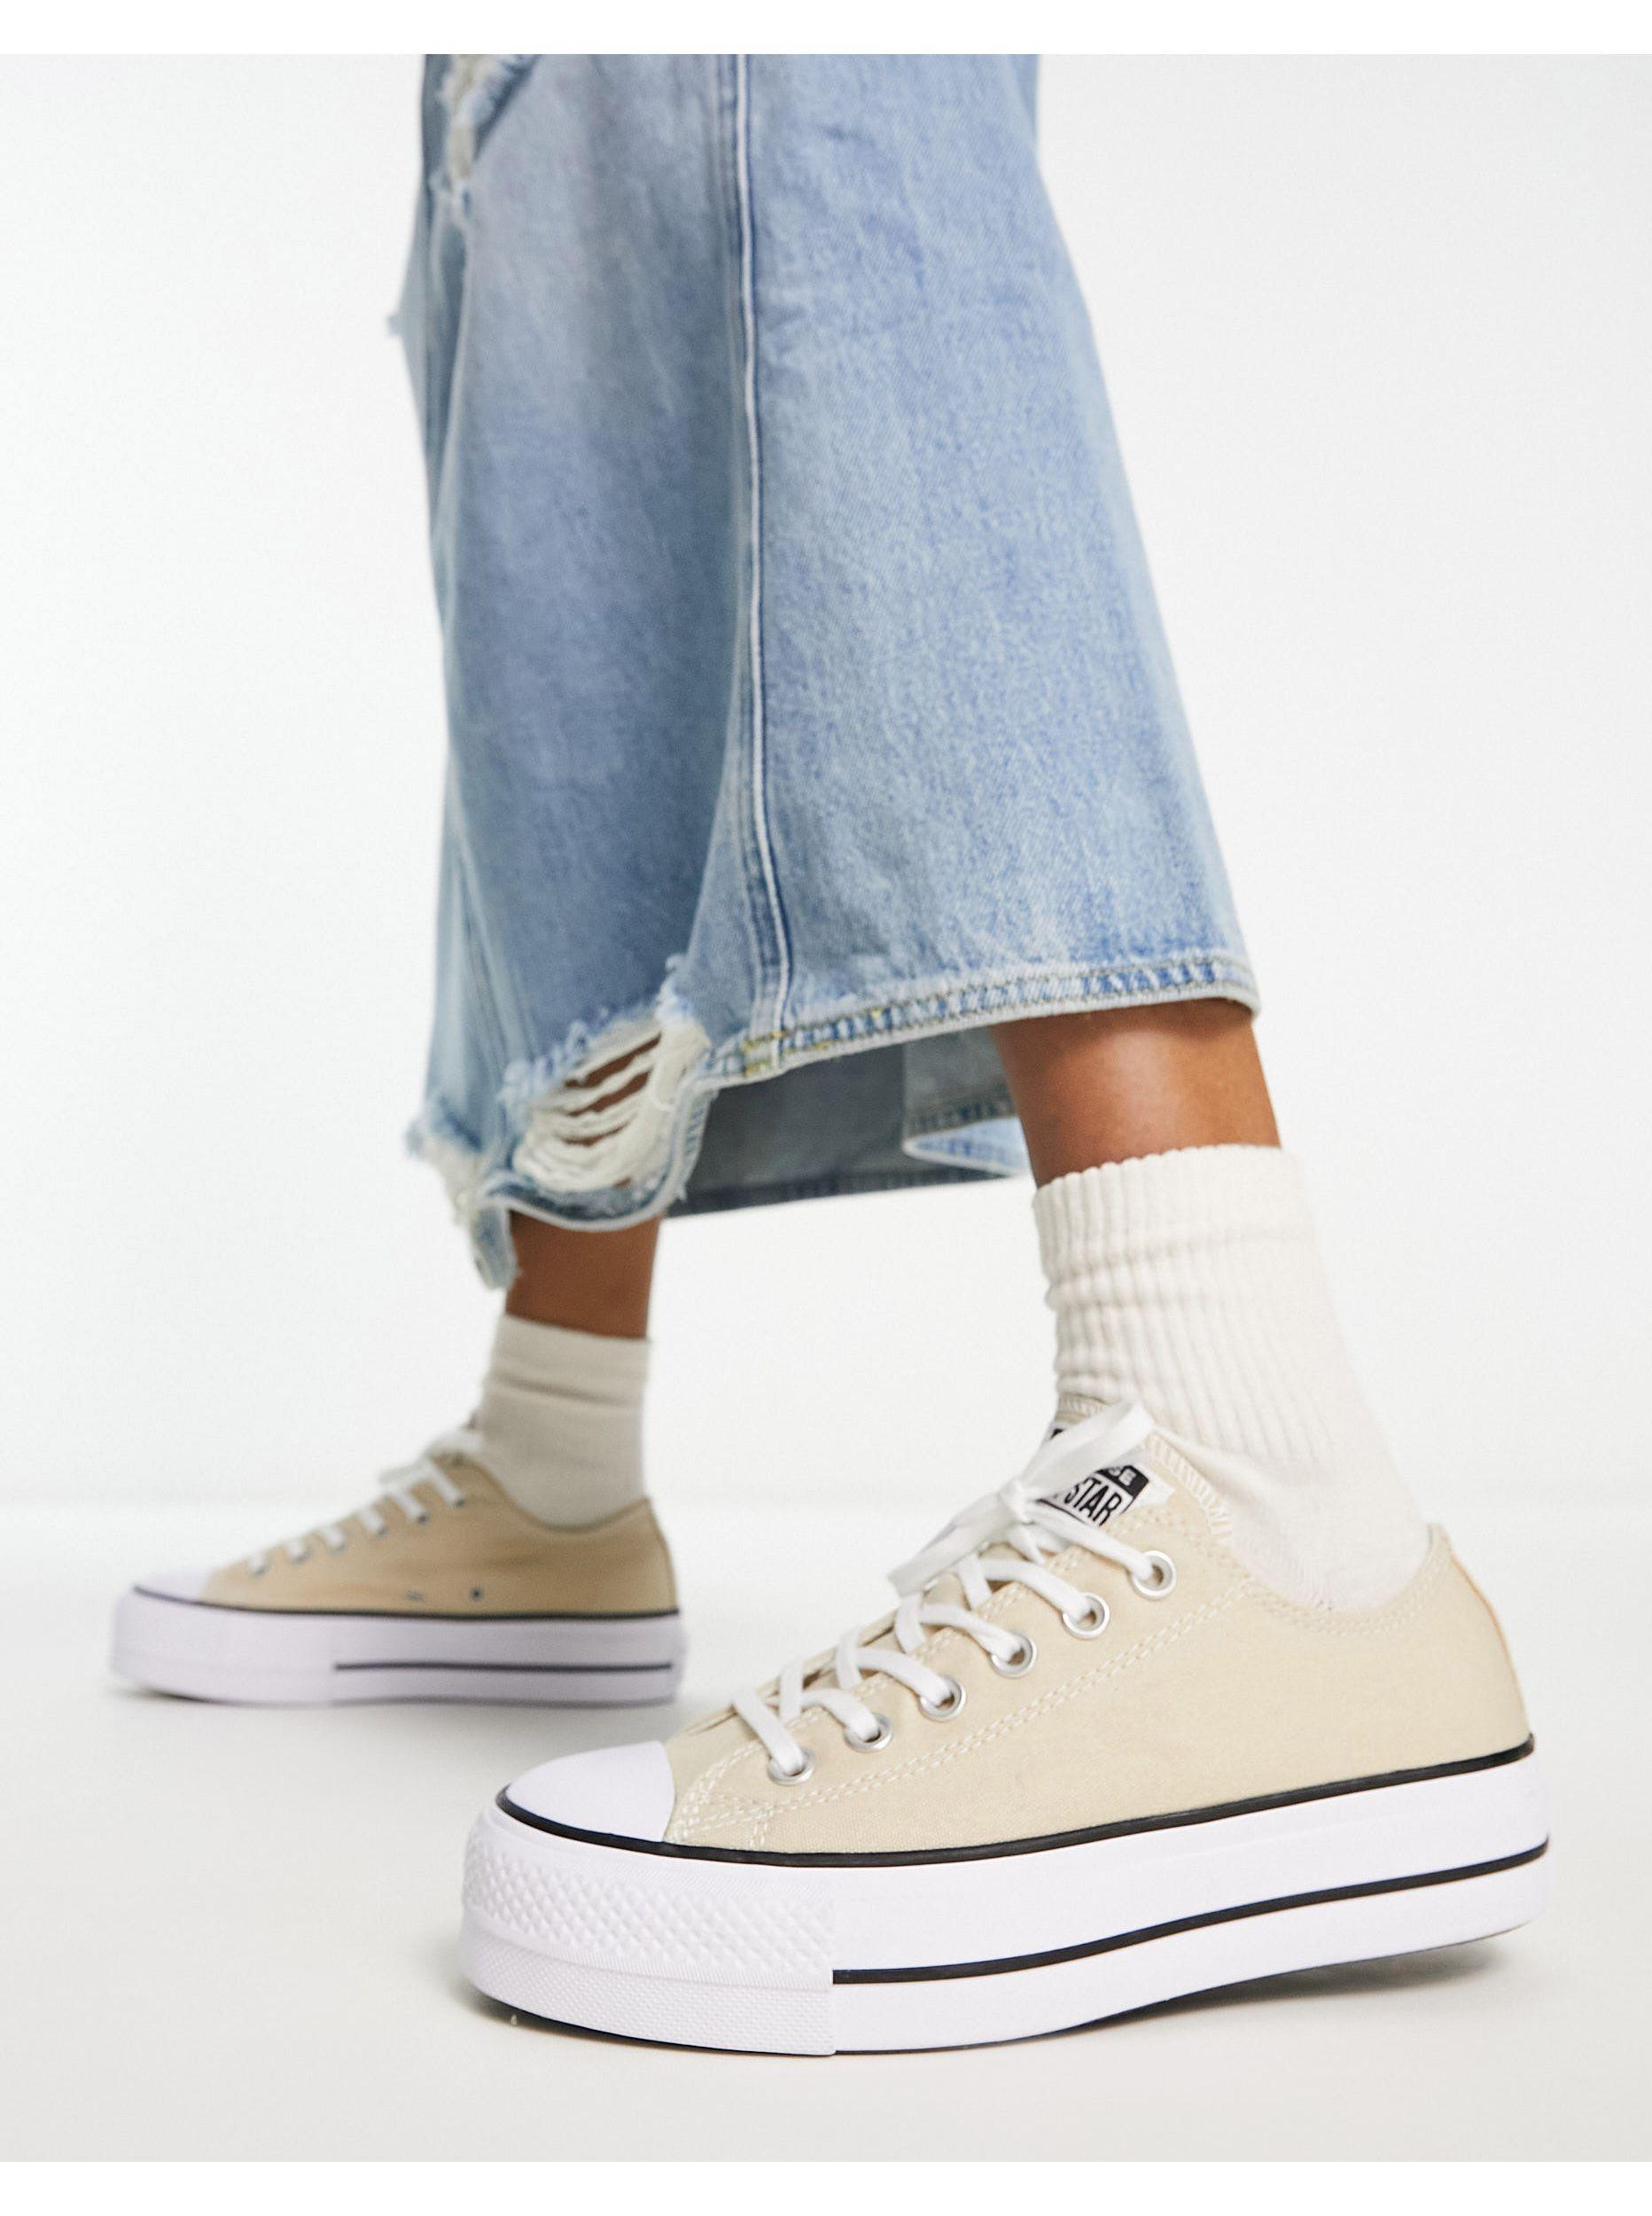 Converse Chuck Taylor All Star Lift Ox Platform Sneakers in White | Lyst